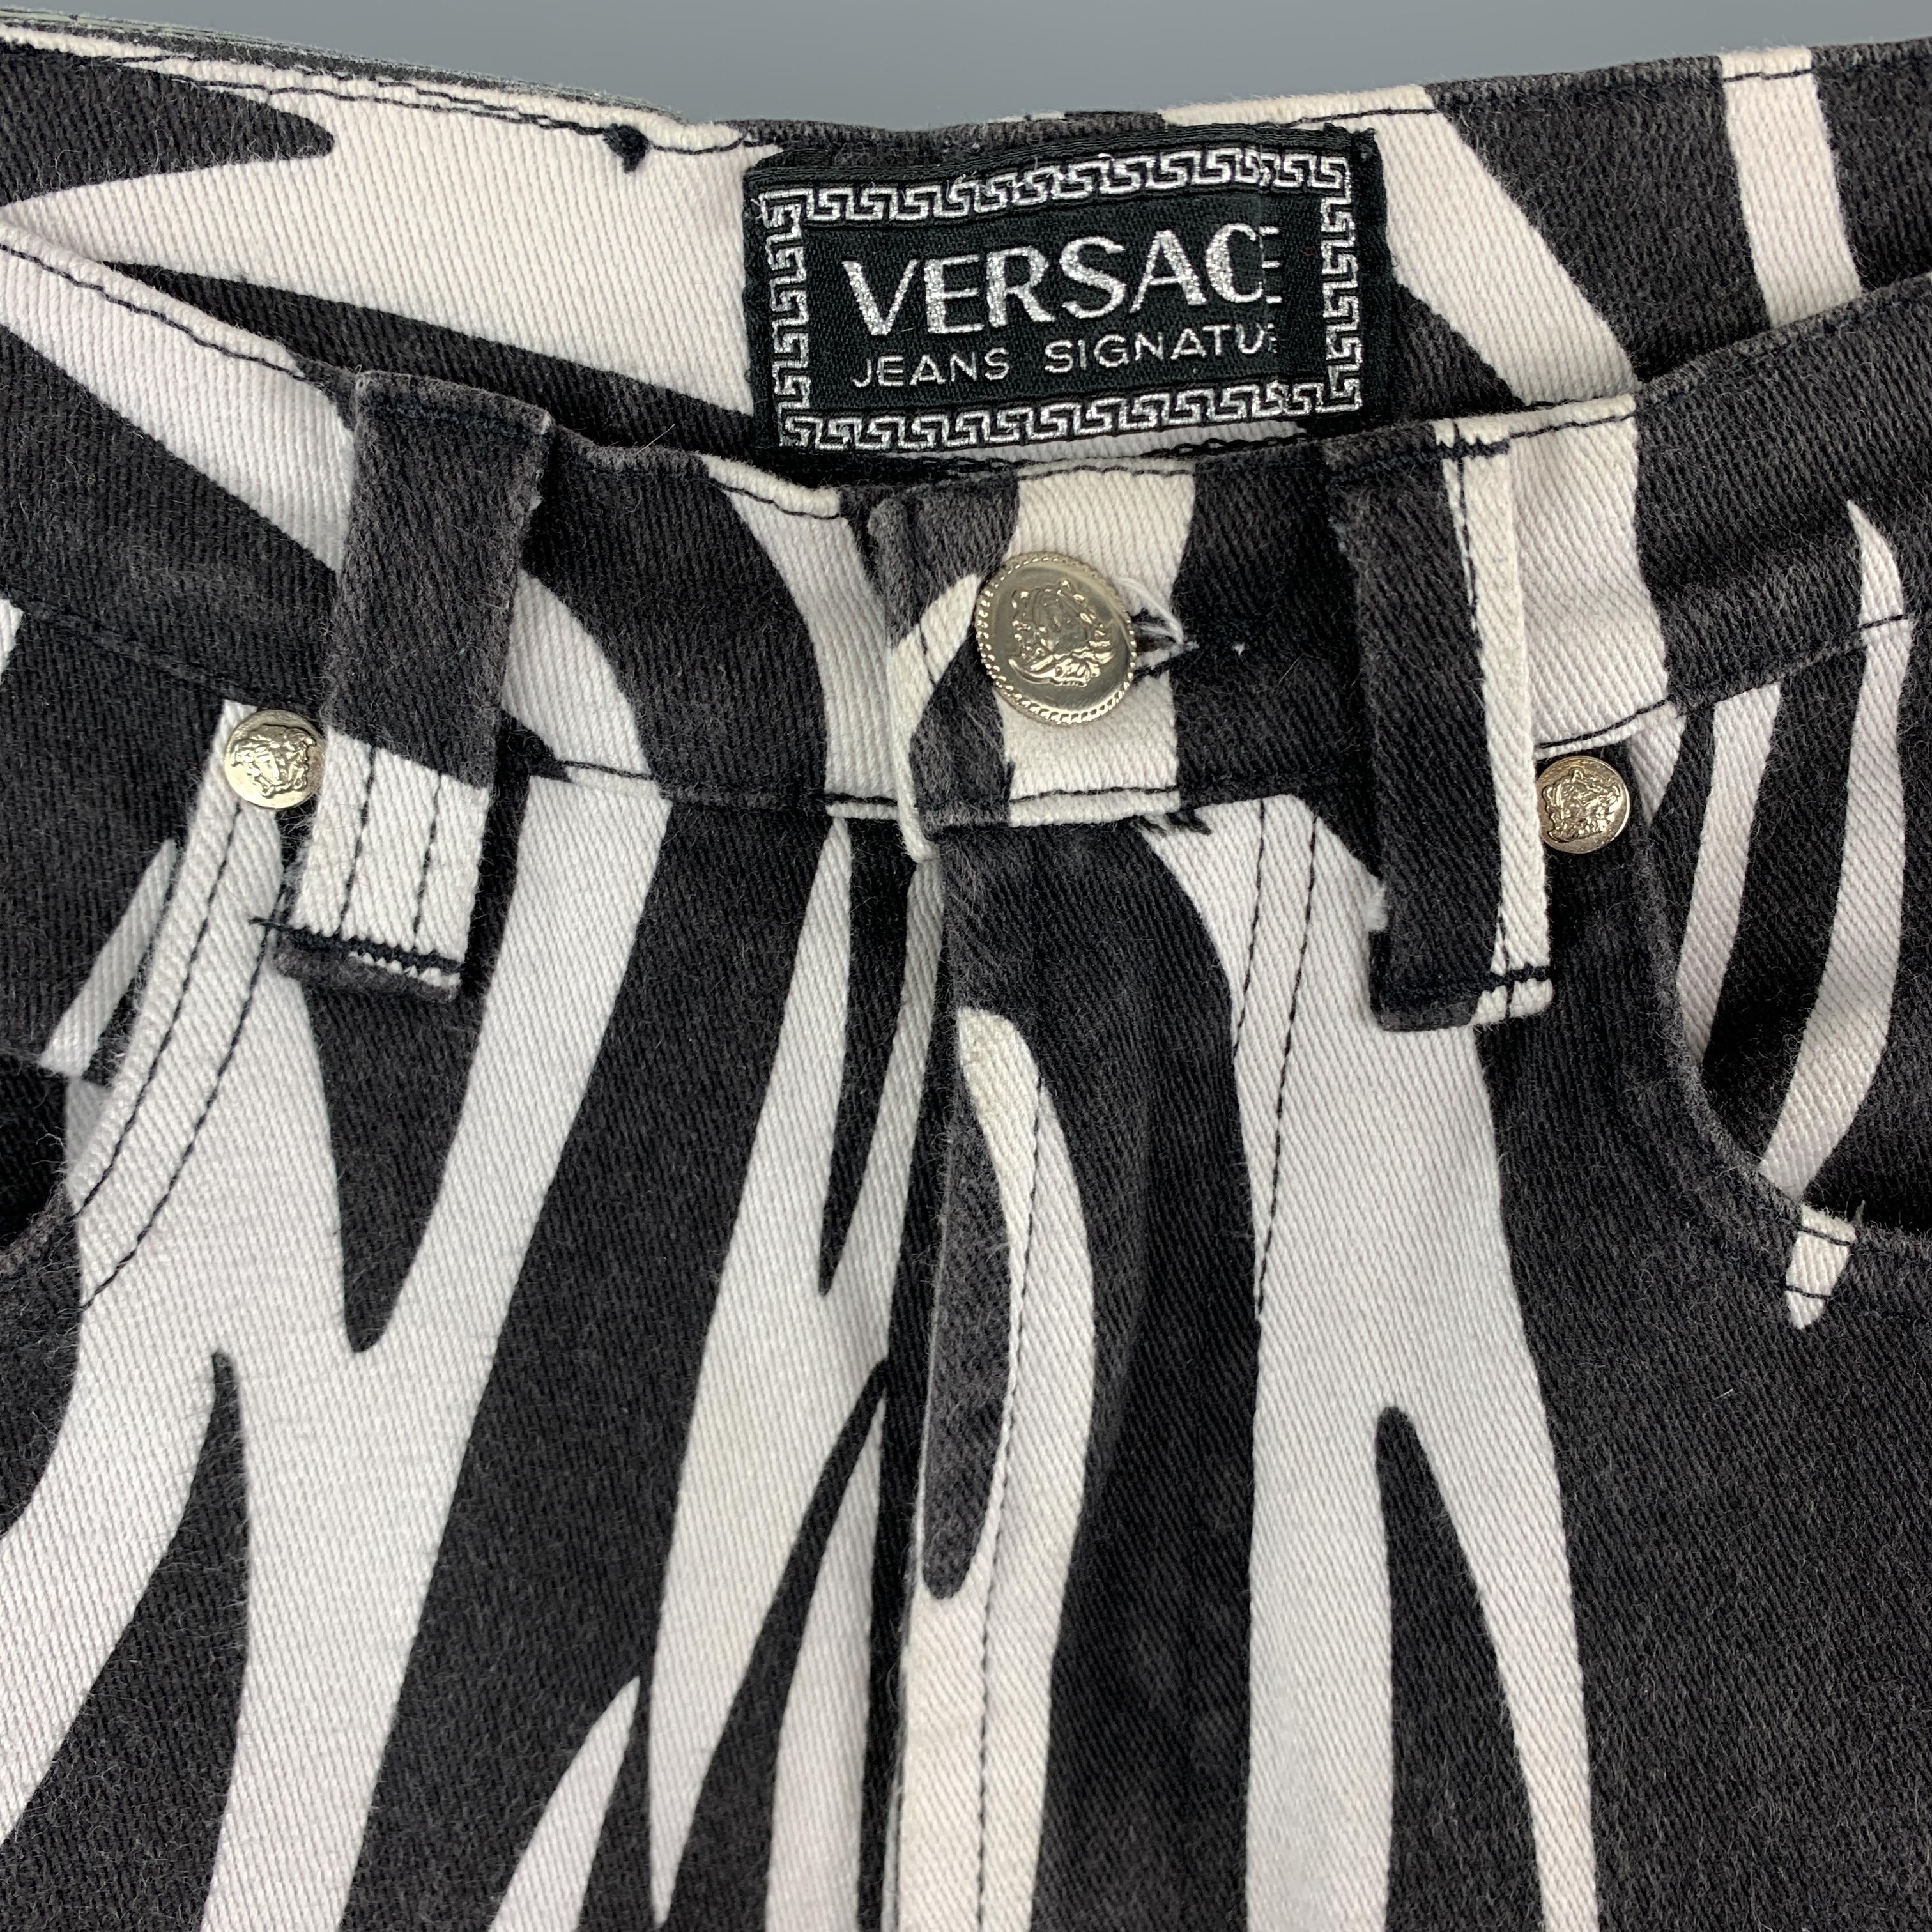 Vintage VERSACE JEANS SIGNATURE jeans come in zebra print stretch denim with a slim high rise fit and silver tone Medusa hardware. Wear throughout. Made in Italy.

Good Pre-Owned Condition.
Marked: 28 42

Measurements:

Waist: 25 in.
Rise: 11